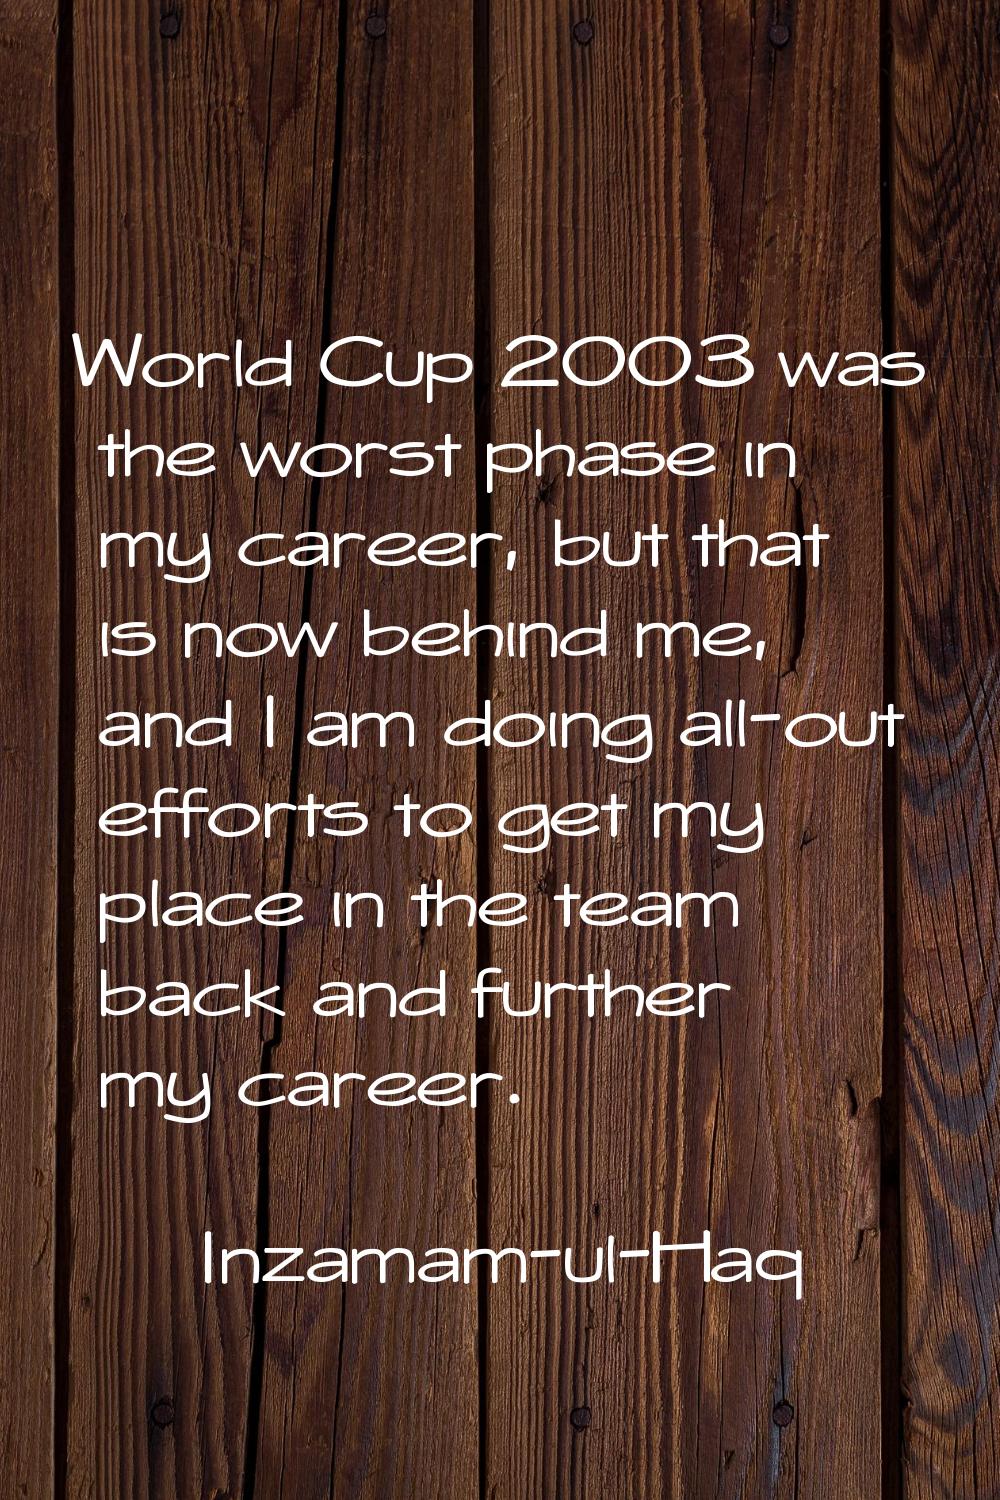 World Cup 2003 was the worst phase in my career, but that is now behind me, and I am doing all-out 